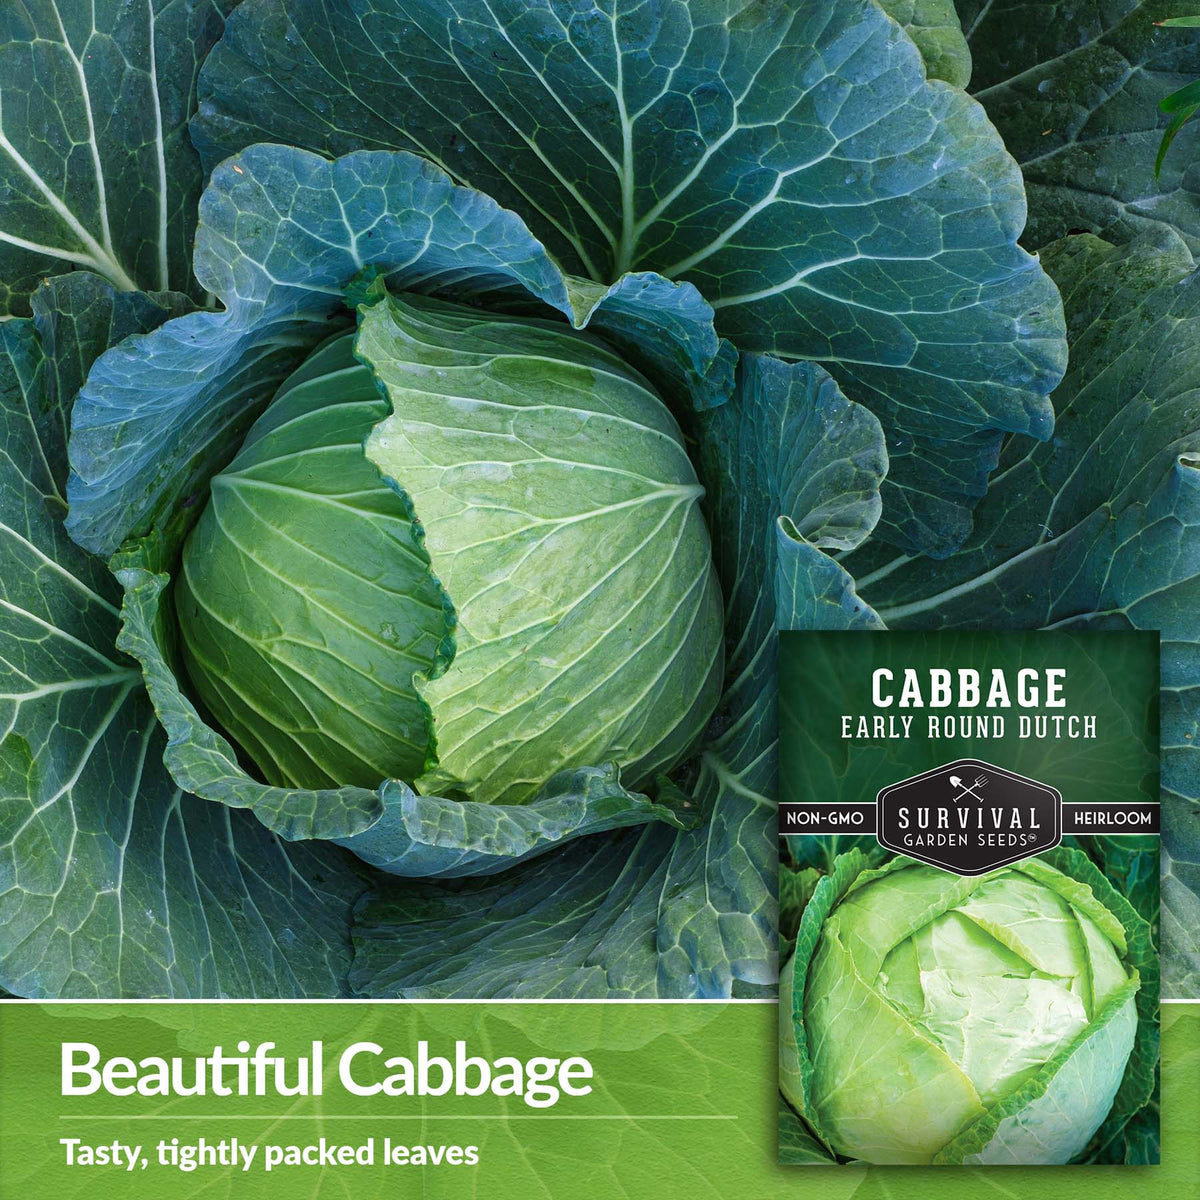 Early Round Dutch Cabbage has tasty, tightly packed leaves